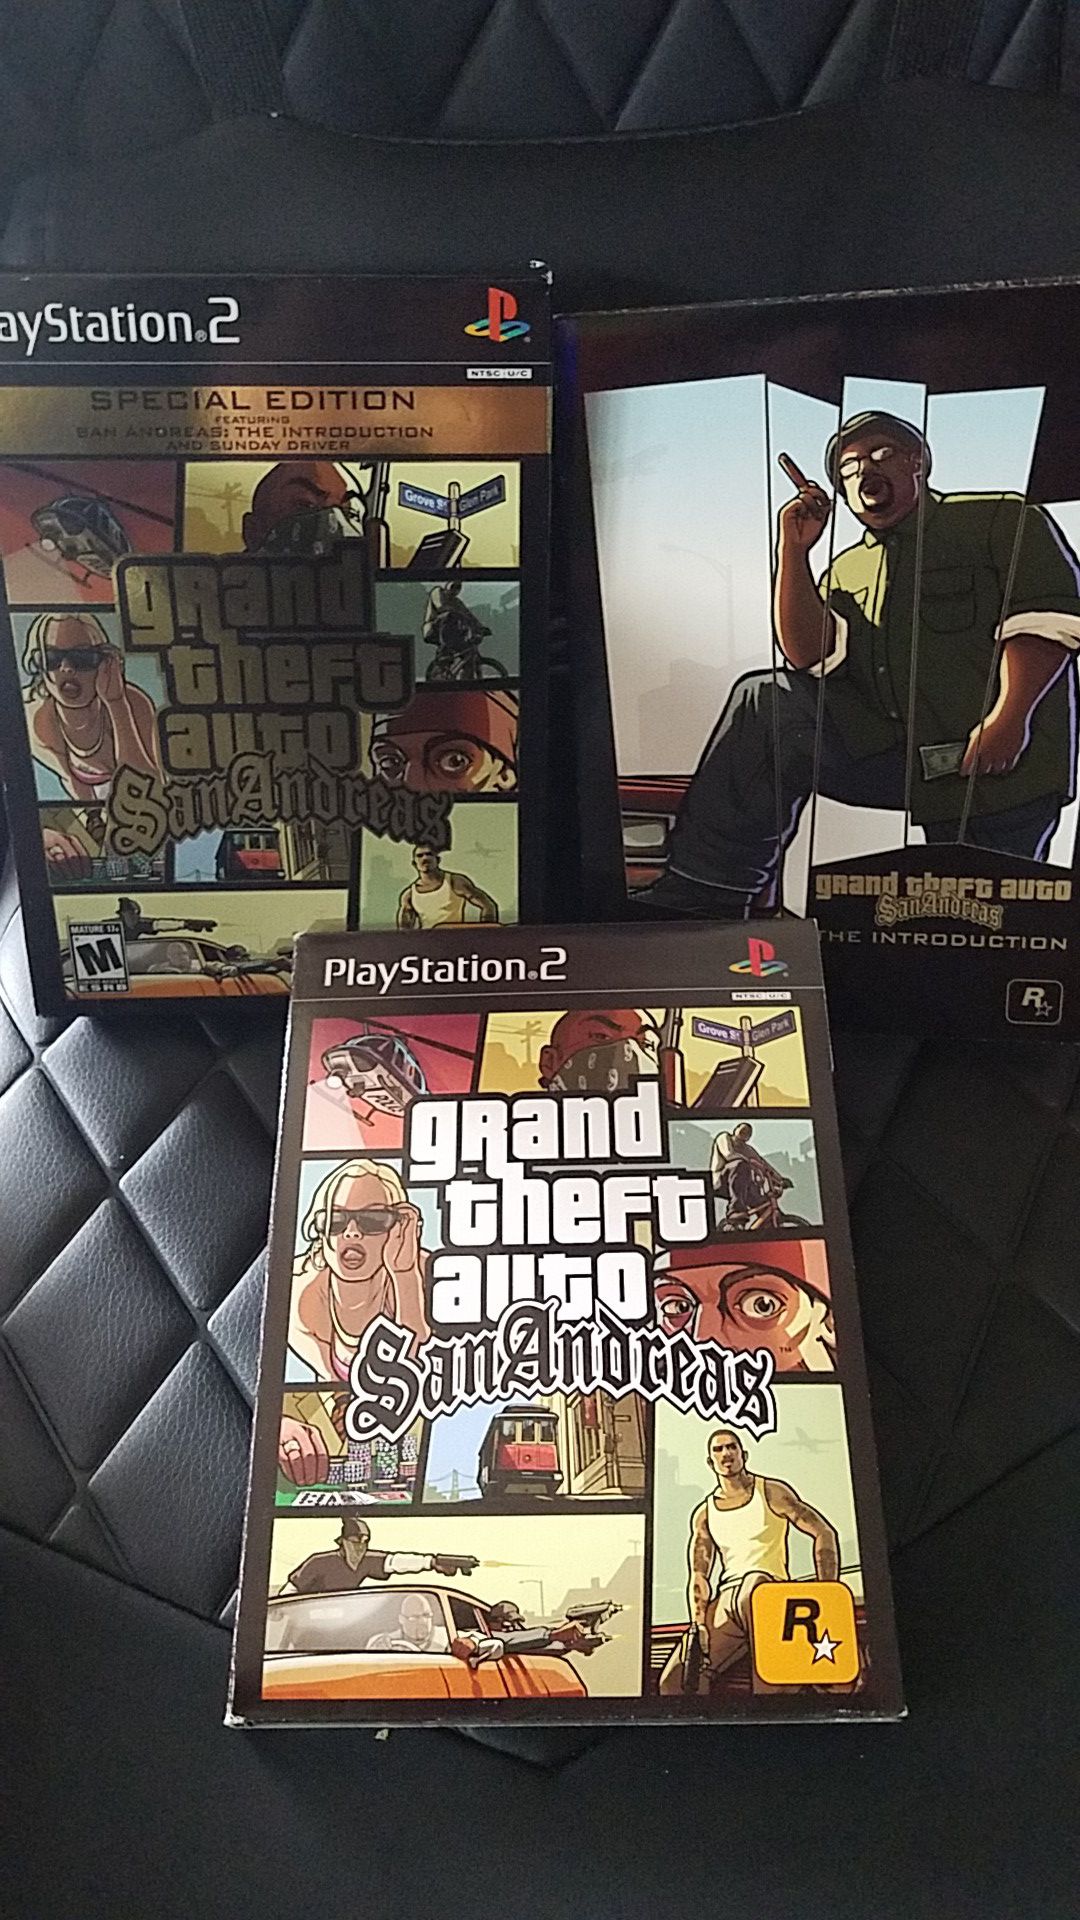 Gta san Andreas special edition for ps2